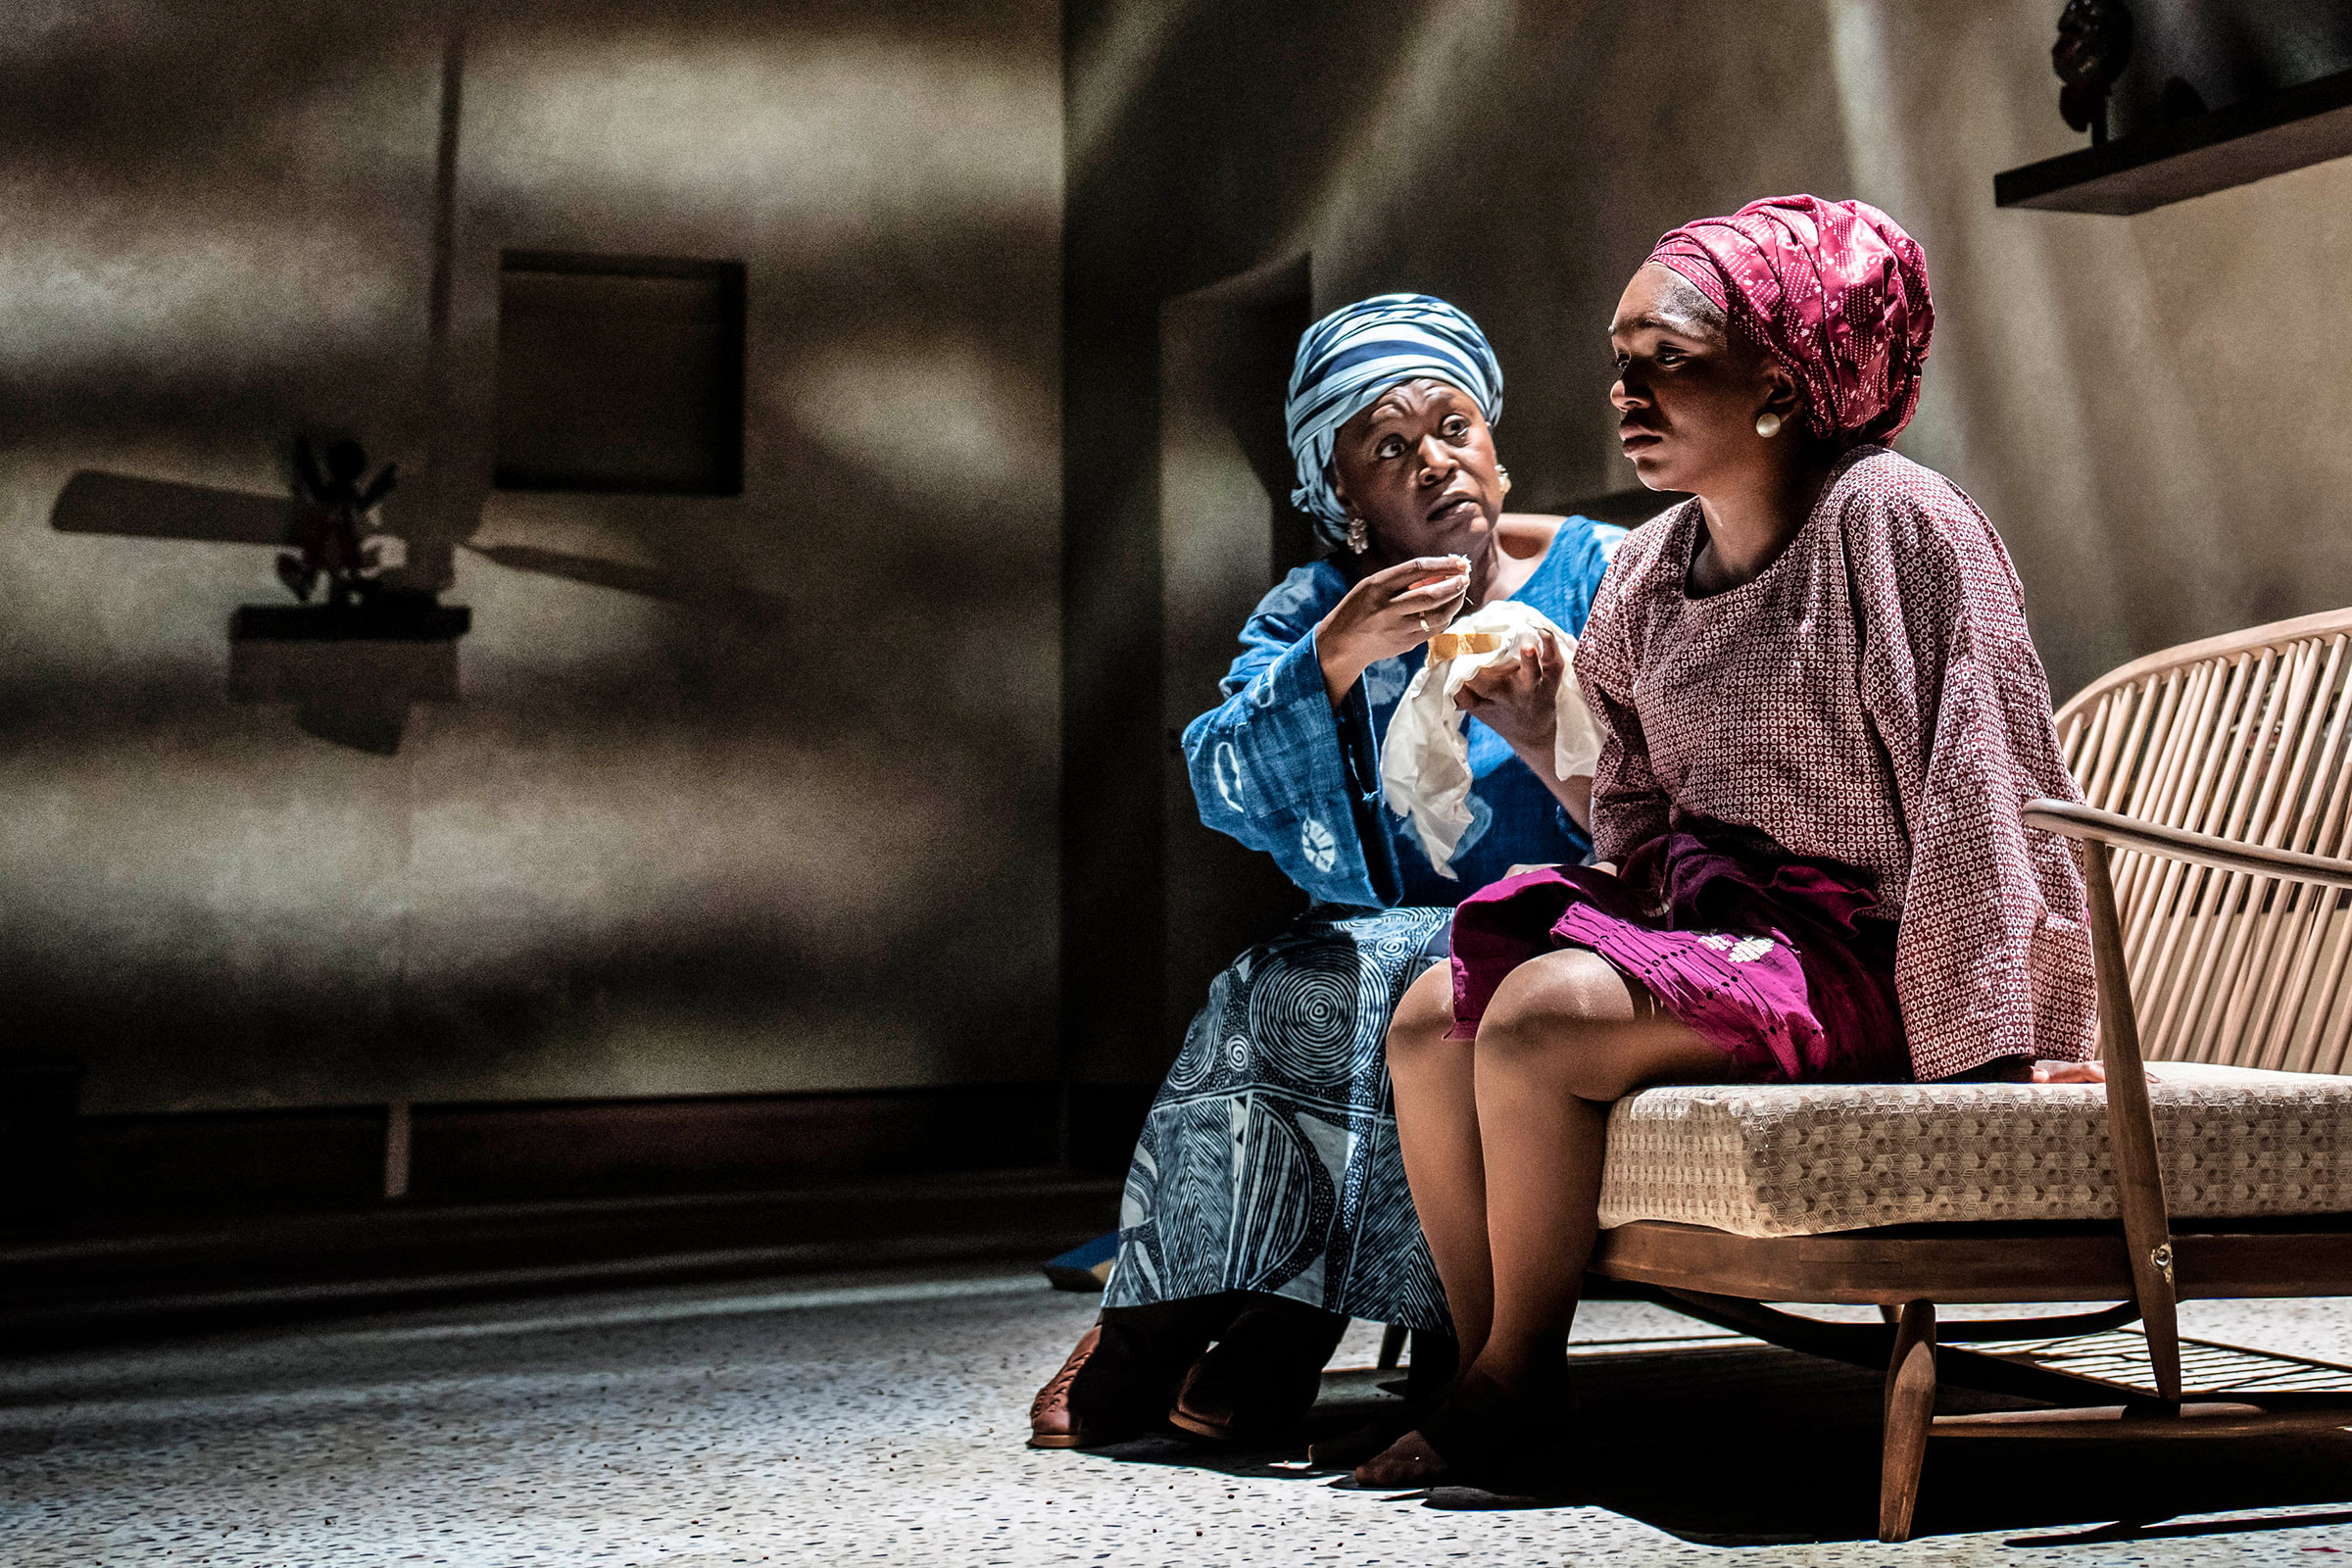 Jumoké Fashola and Cherrelle Skeete in Beneatha’s Place at Young Vic. © Johan Persson